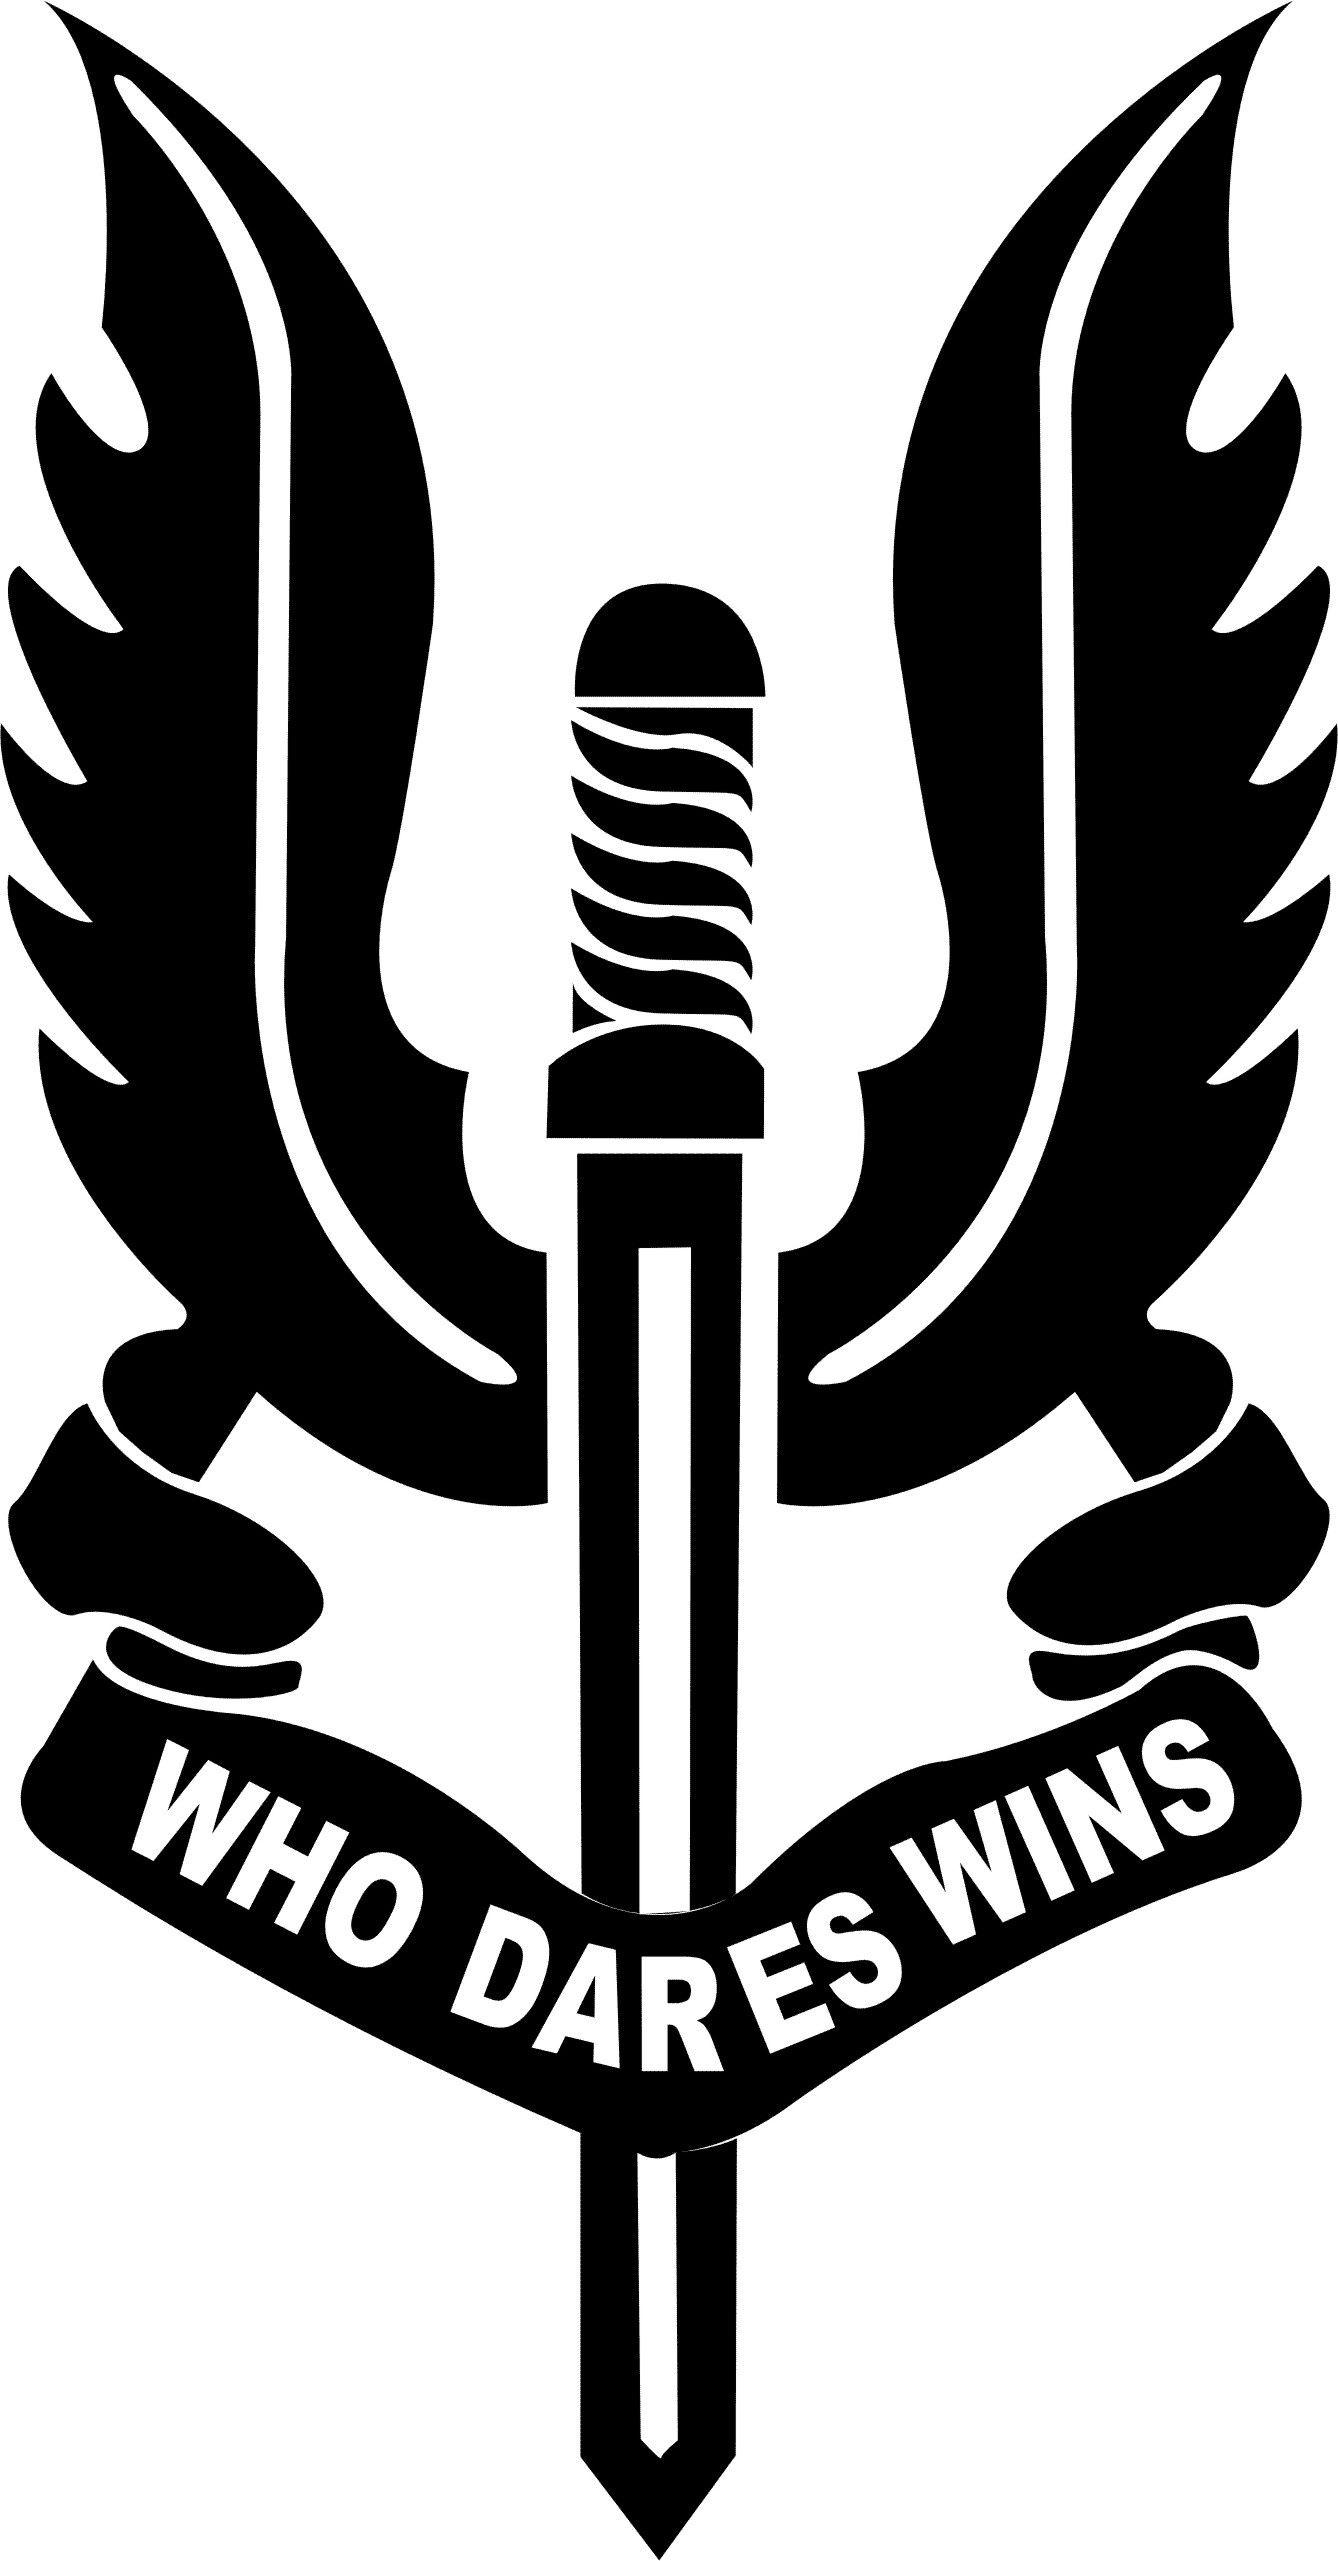 Who dares wins. Quotes to Remember. Special forces logo, Sas